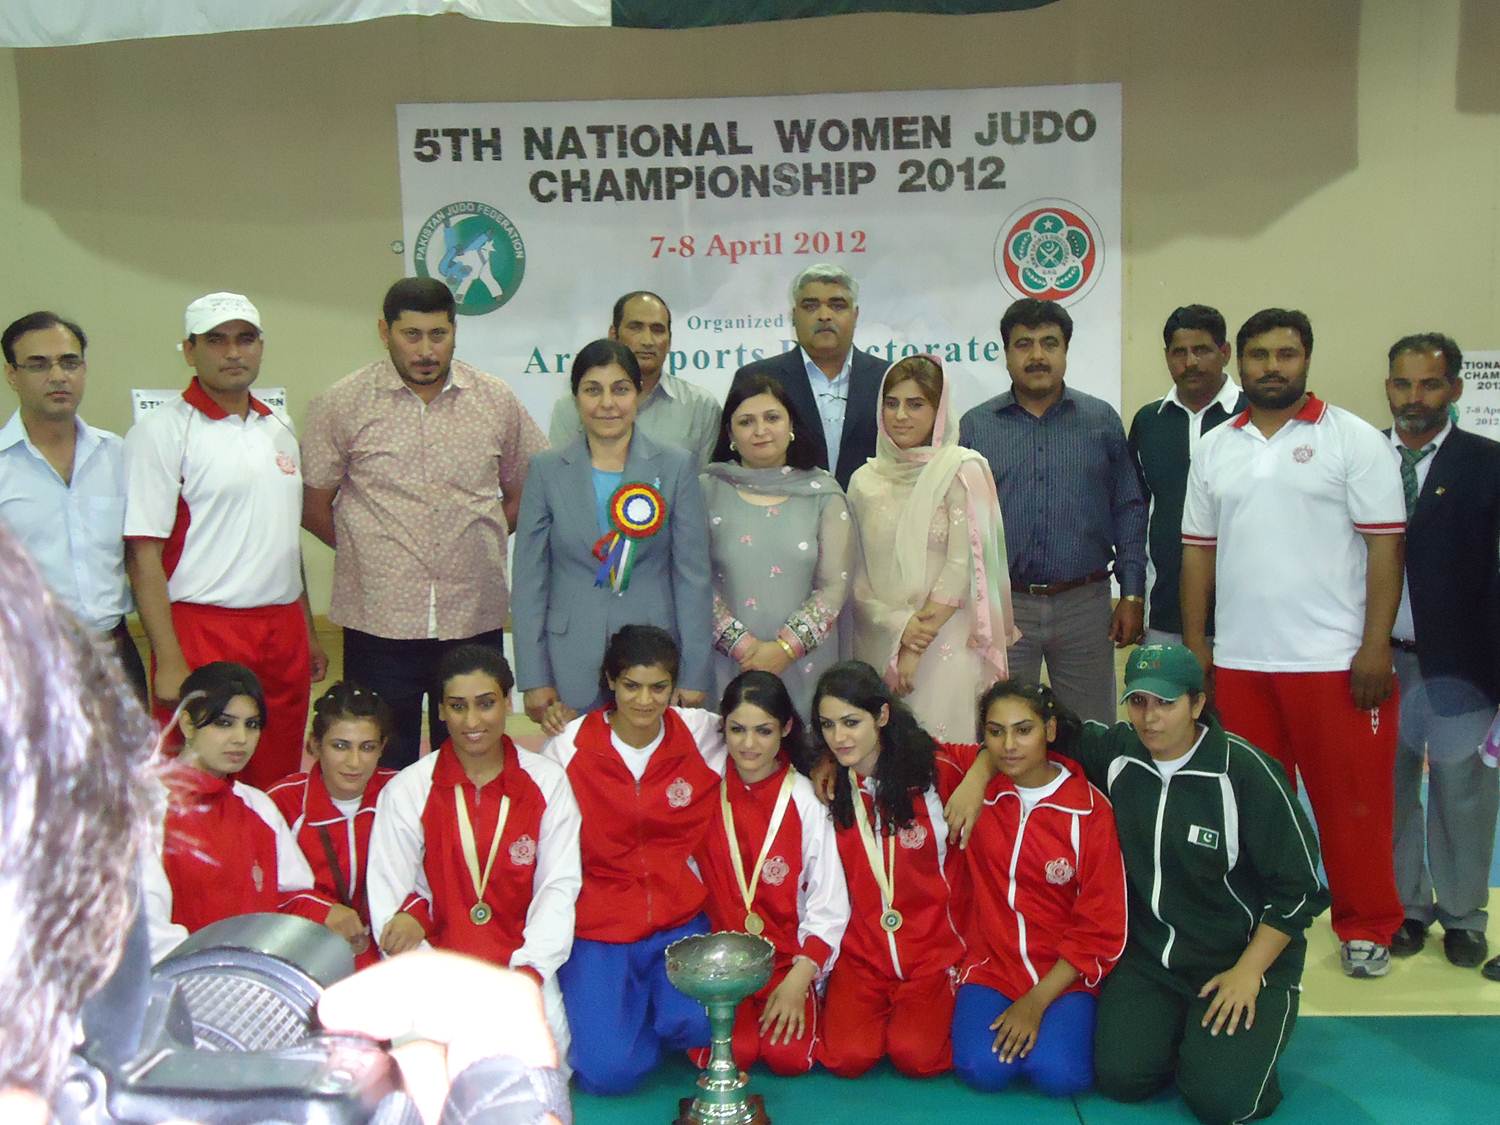 Final Results of the 5th Women National Judo Championships 2012